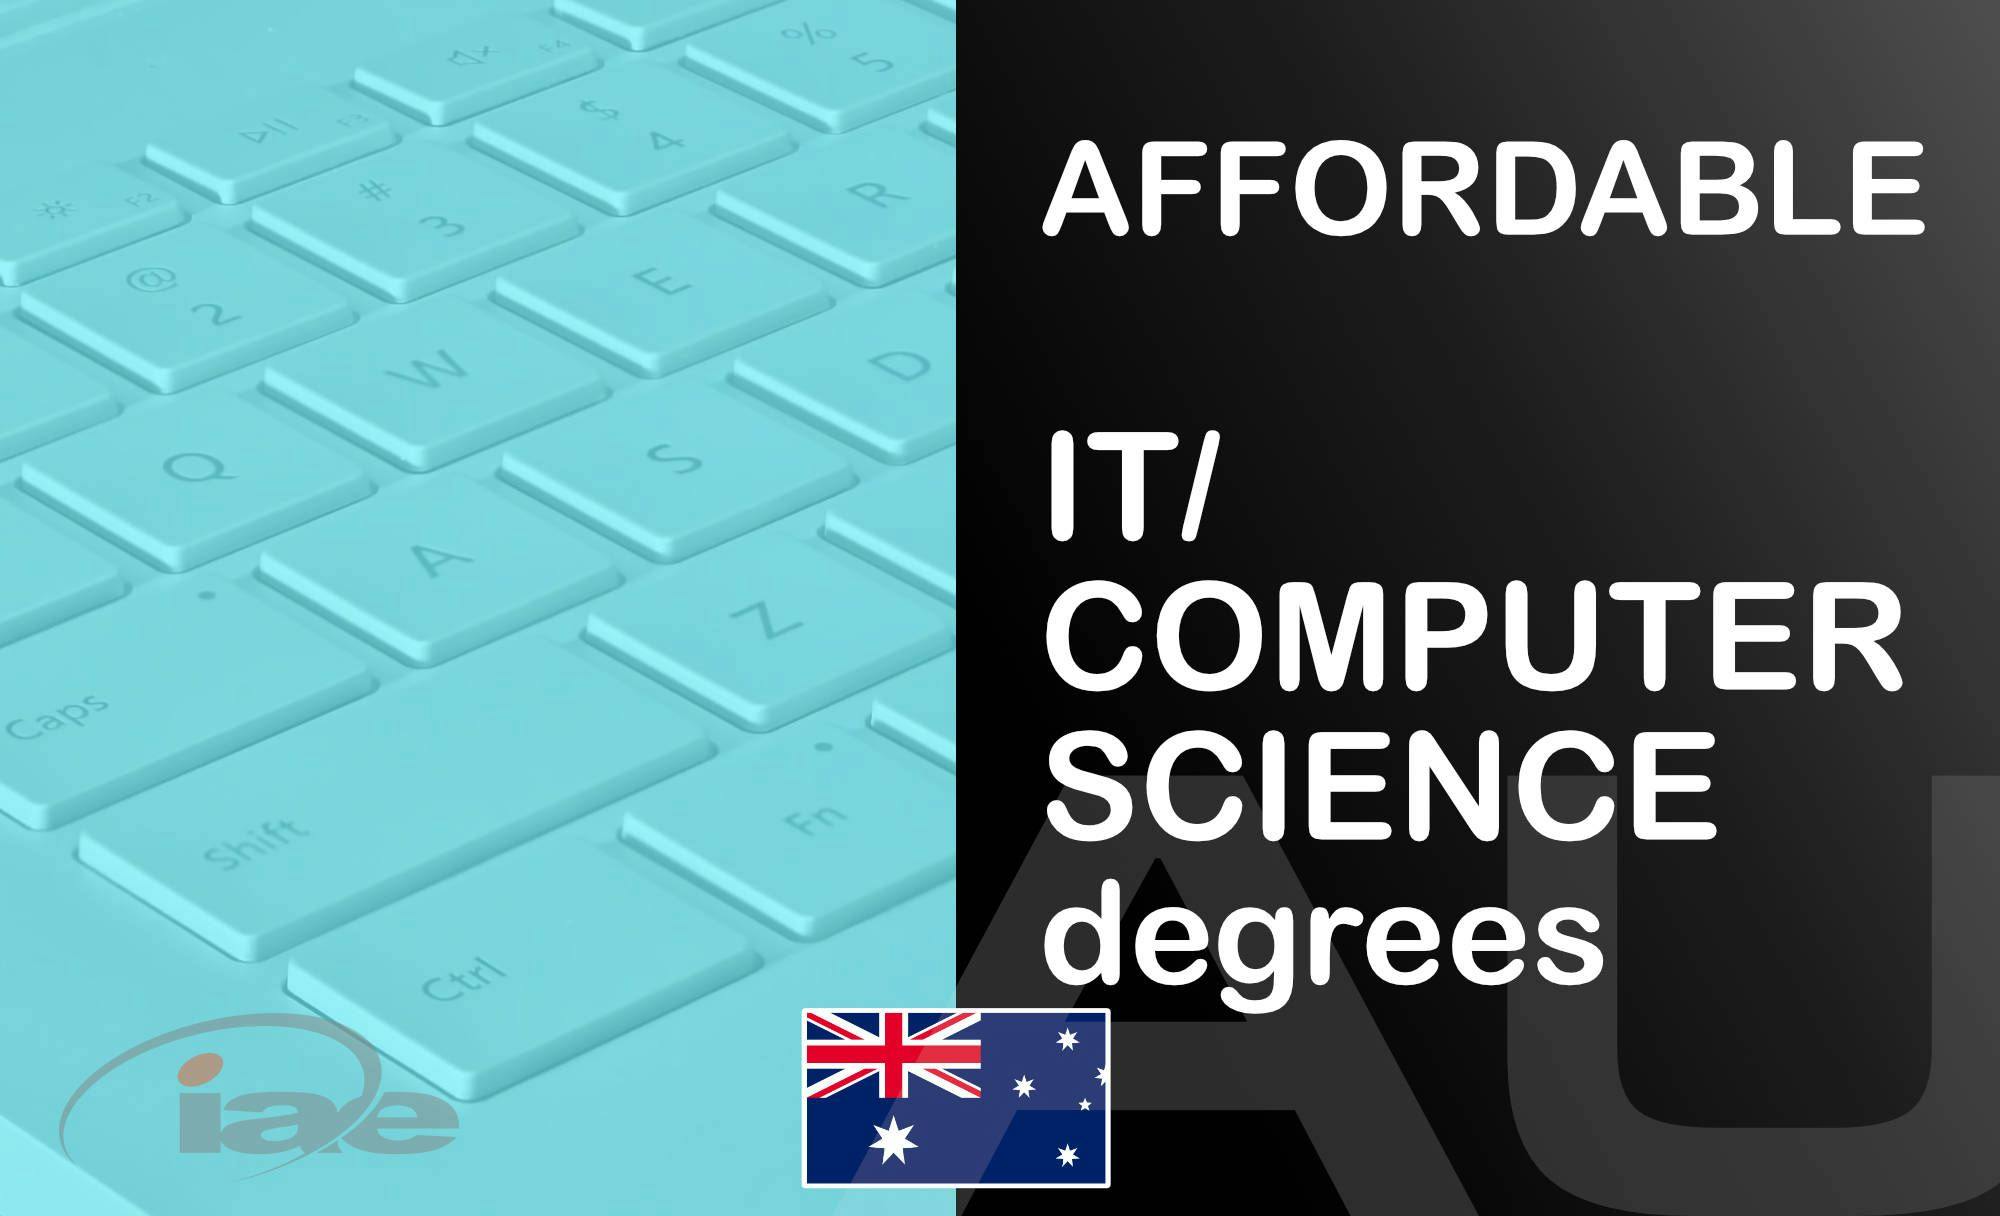 🇦🇺 Top 5 most affordable BIT/Bachelors in Computer Science degrees in Australia